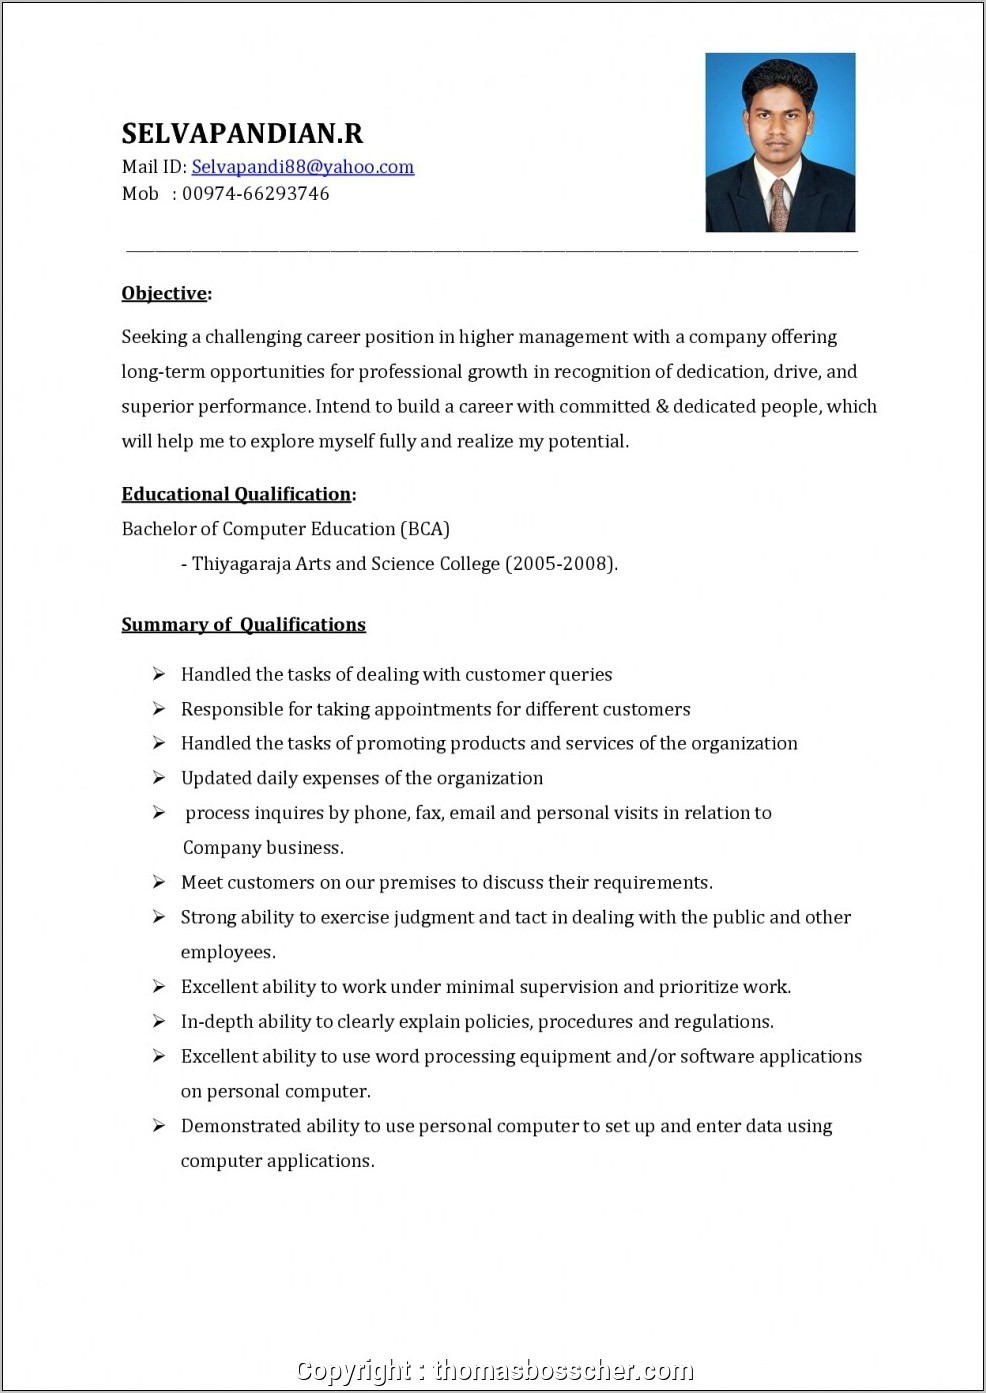 Resume Format For Sales Executive Free Download